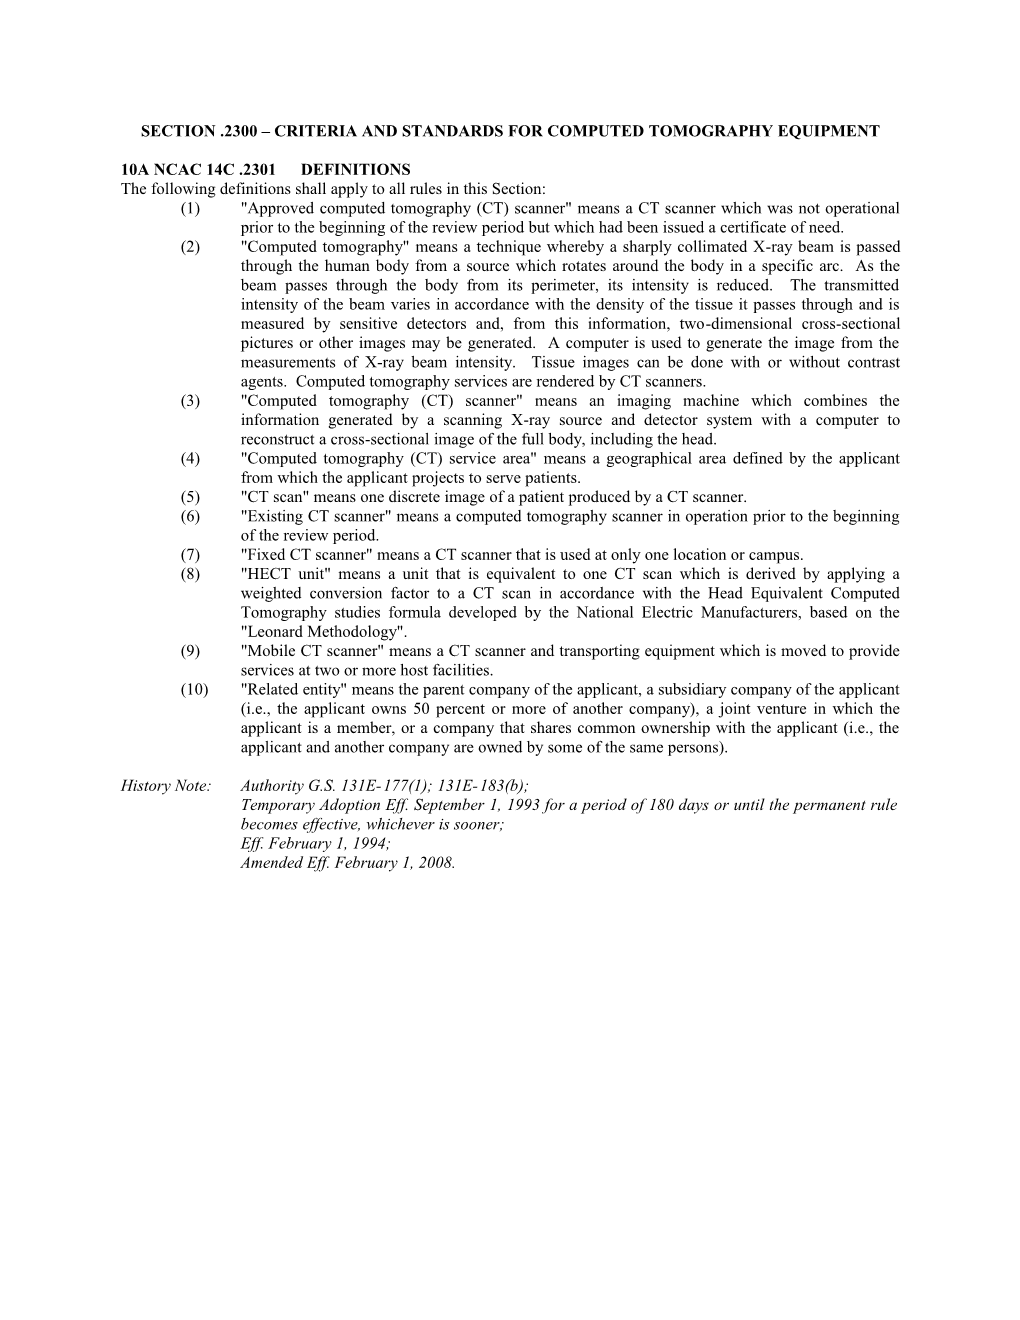 Section .2300 Criteria and Standards for Computed Tomography Equipment